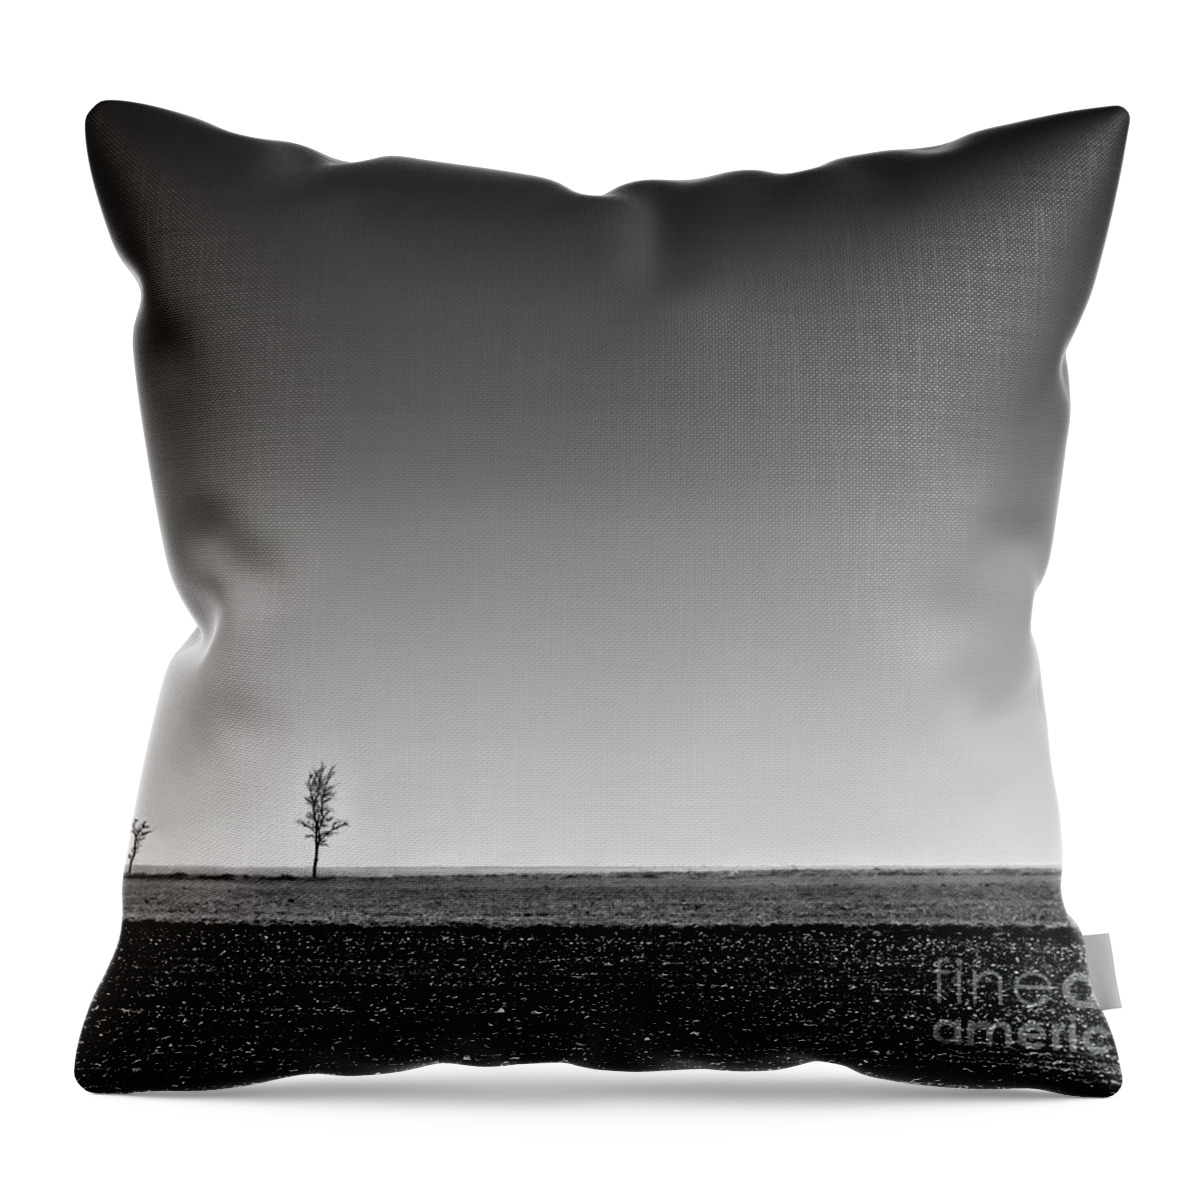 Earth Is Ready For Seeding - Graphics Of Spring Fields Throw Pillow featuring the photograph Earth Is Ready For Seeding - Graphics Of Spring Fields by Tatiana Bogracheva